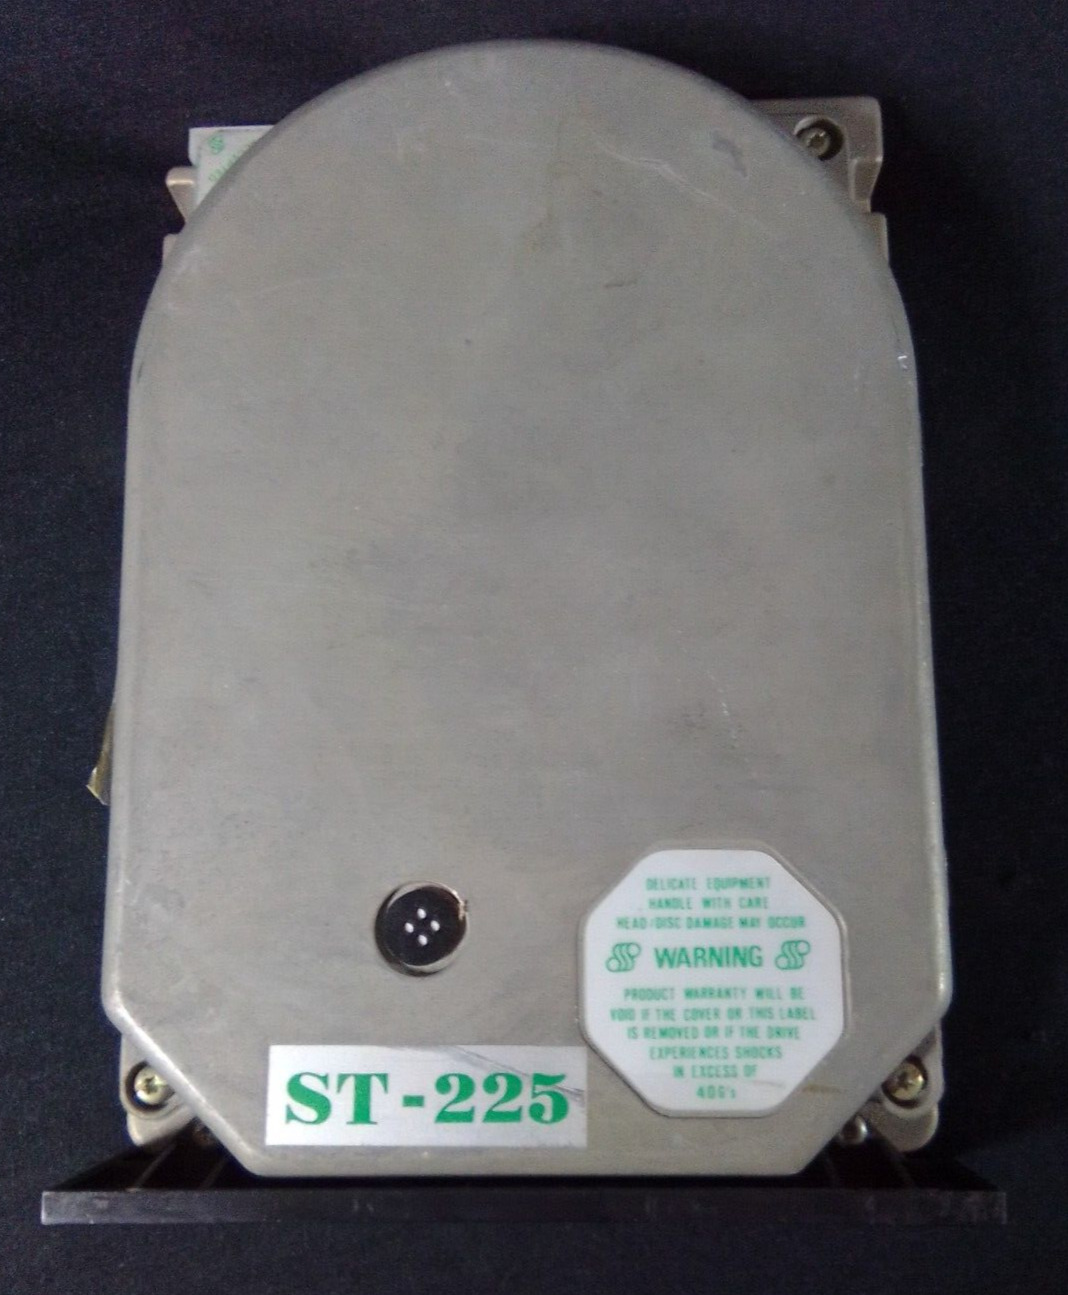 Seagate ST-225 Hard Drive 20MB IBM XT PC Untested Powers On Spins Up Panel #1